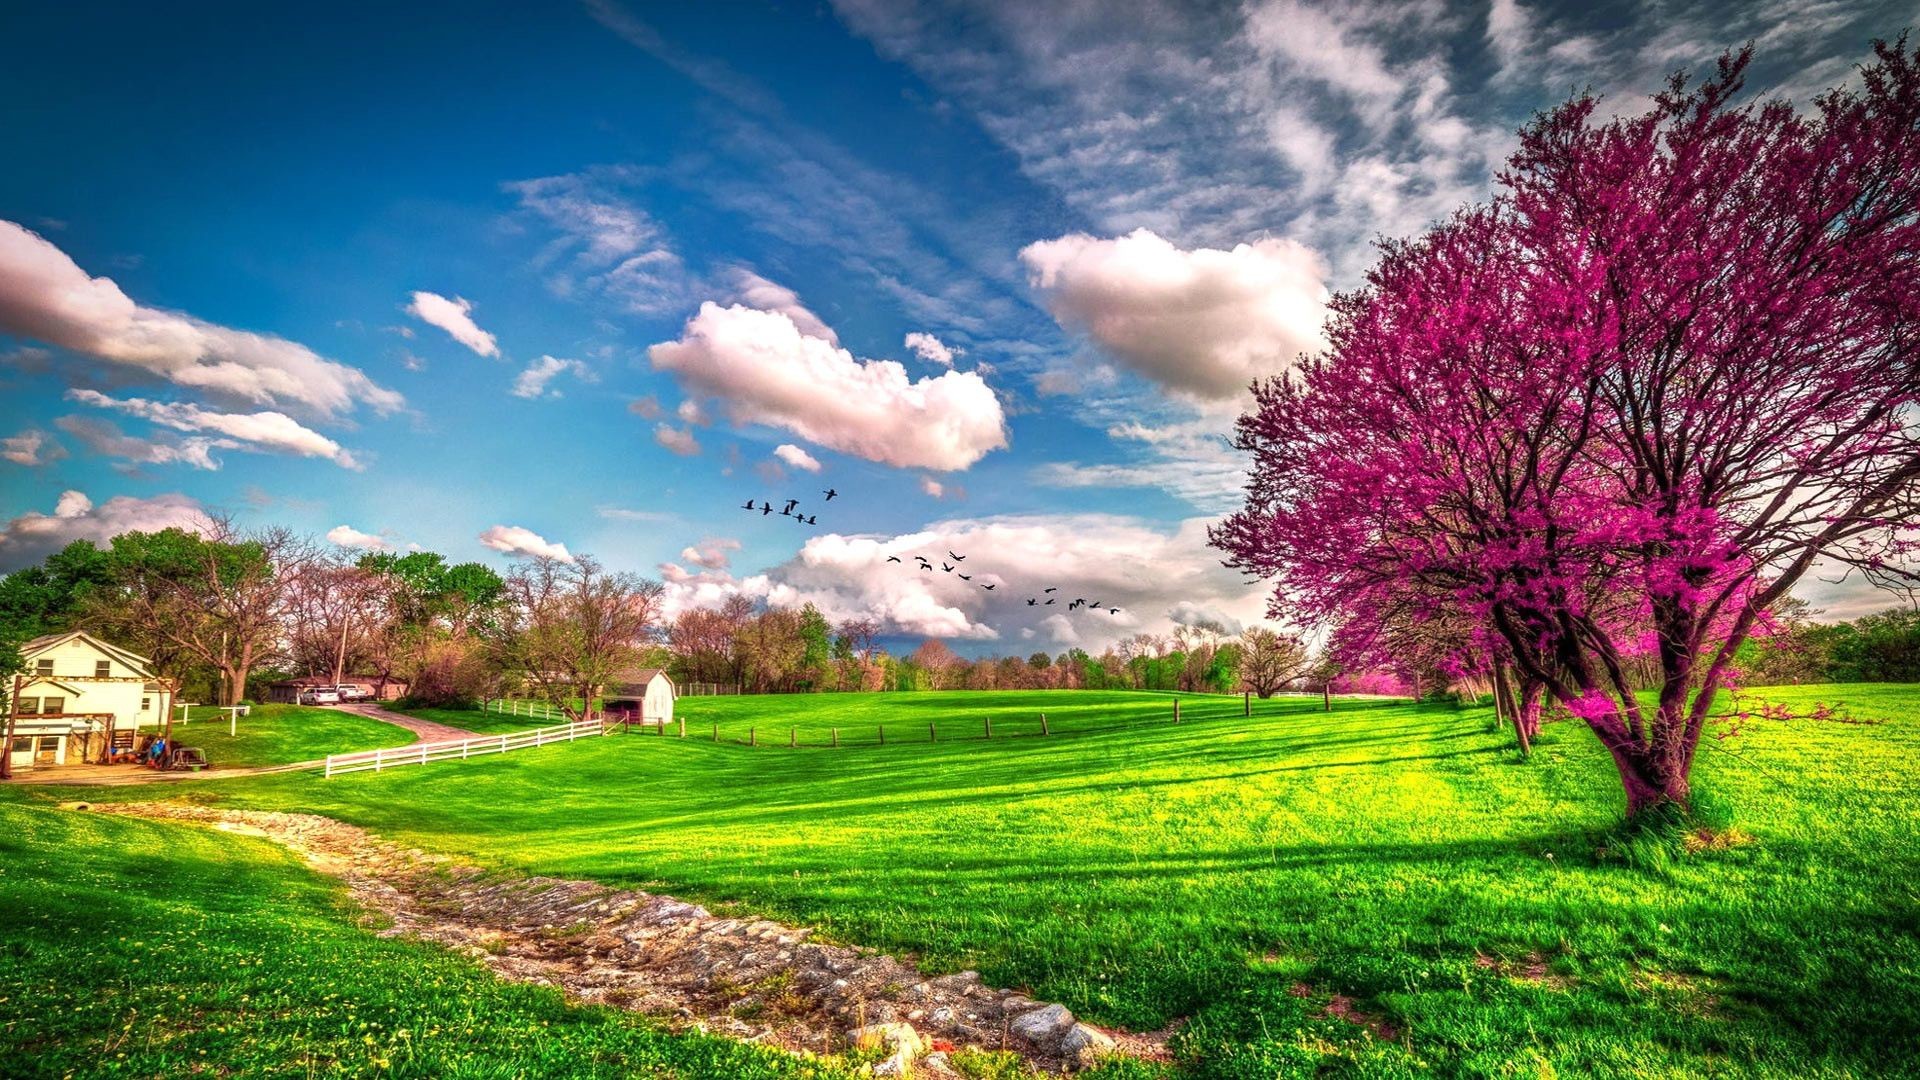 1920x1080 National Geographic Wallpaper Spring Scenes #375C158, 0.49 .